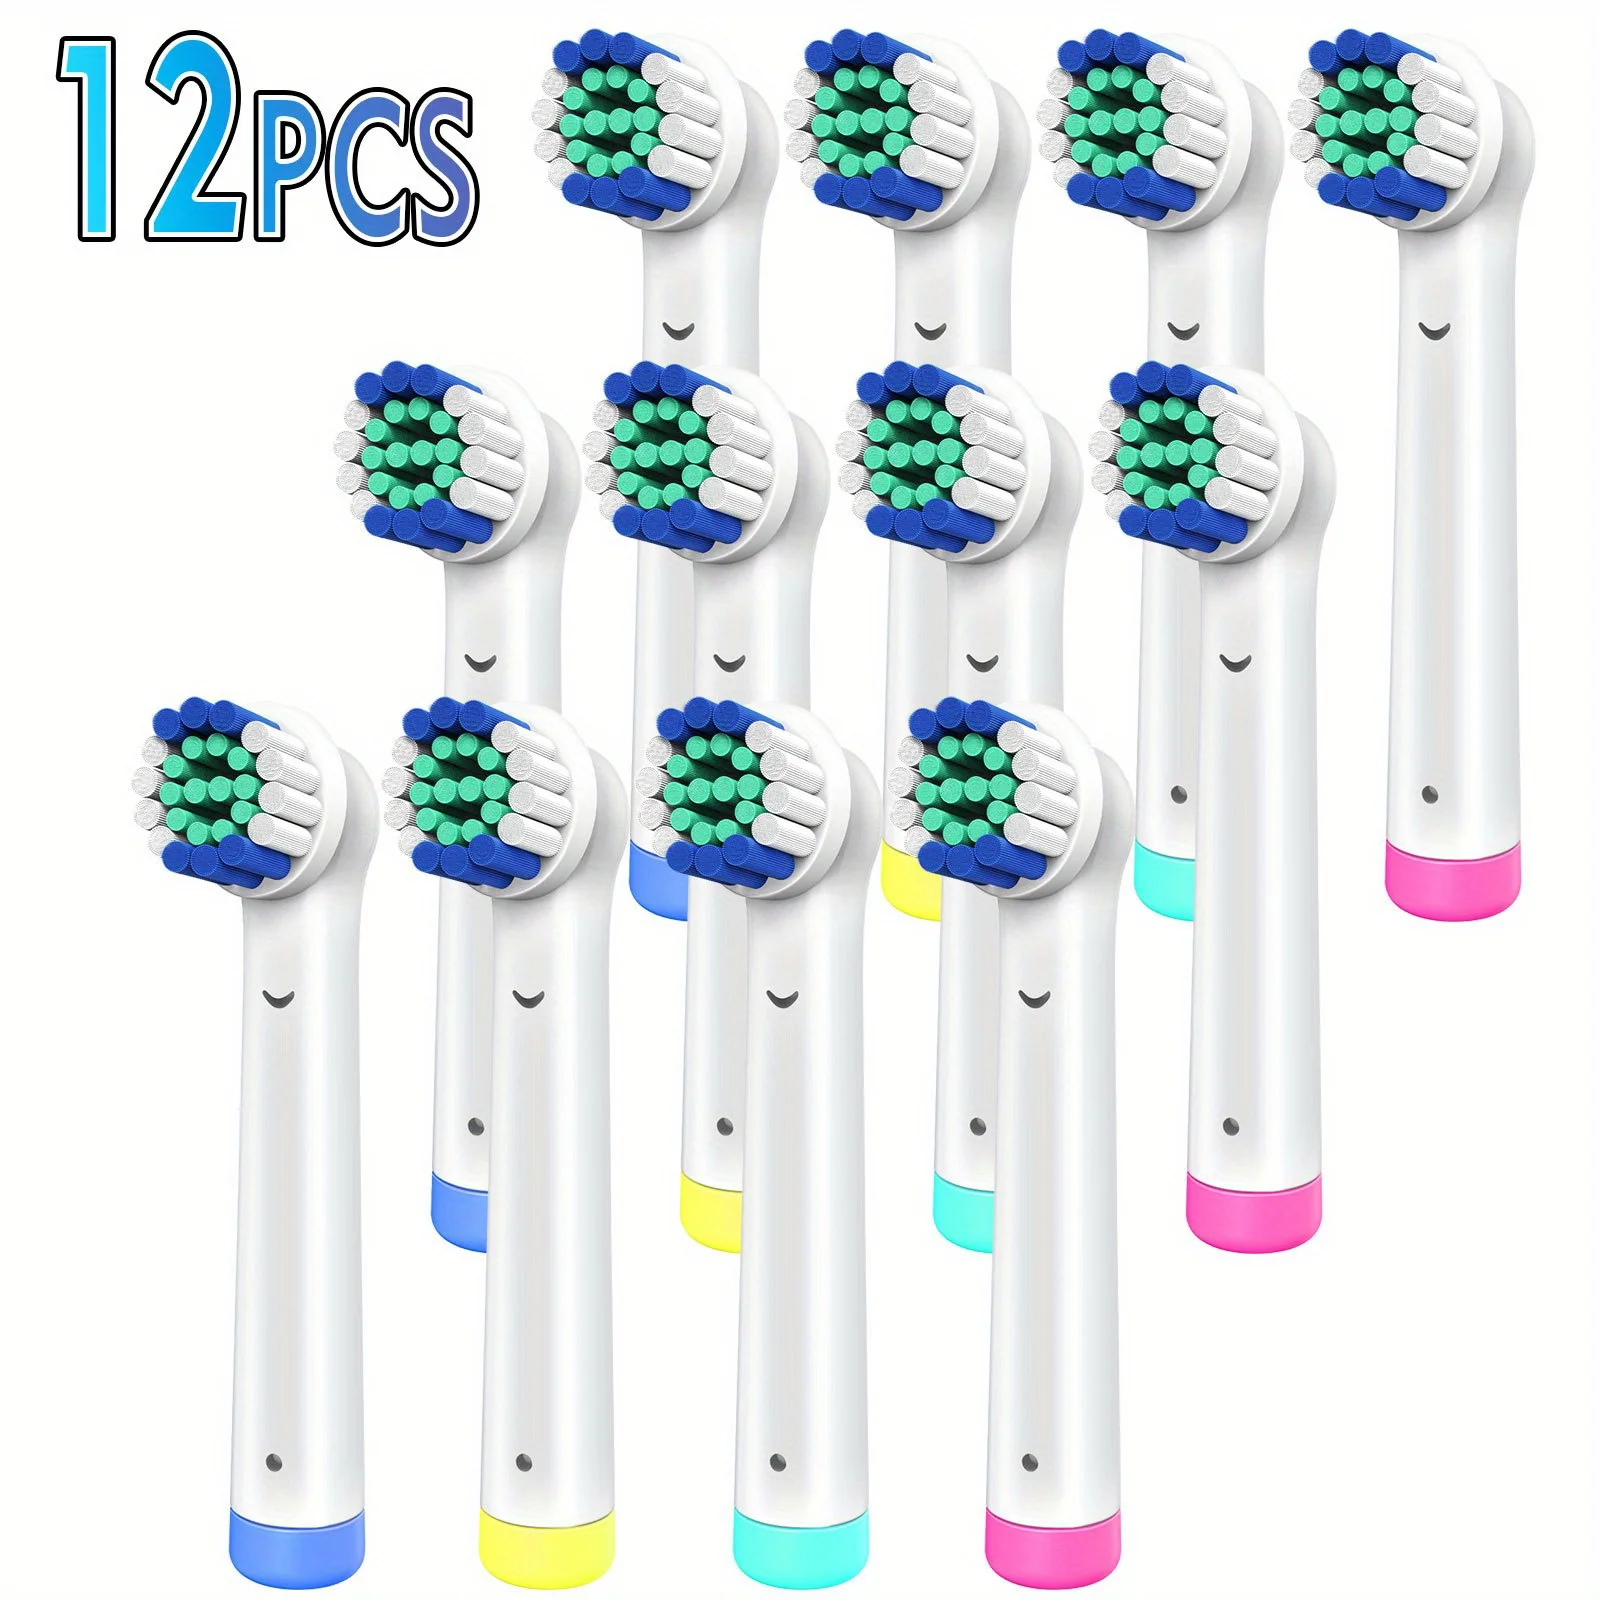 

Replacement Toothbrush Heads with OralB Braun, 12 Pcs Gentle Cleaning Soft Bristle Electric Toothbrush Head Tooth Deep Cleansing